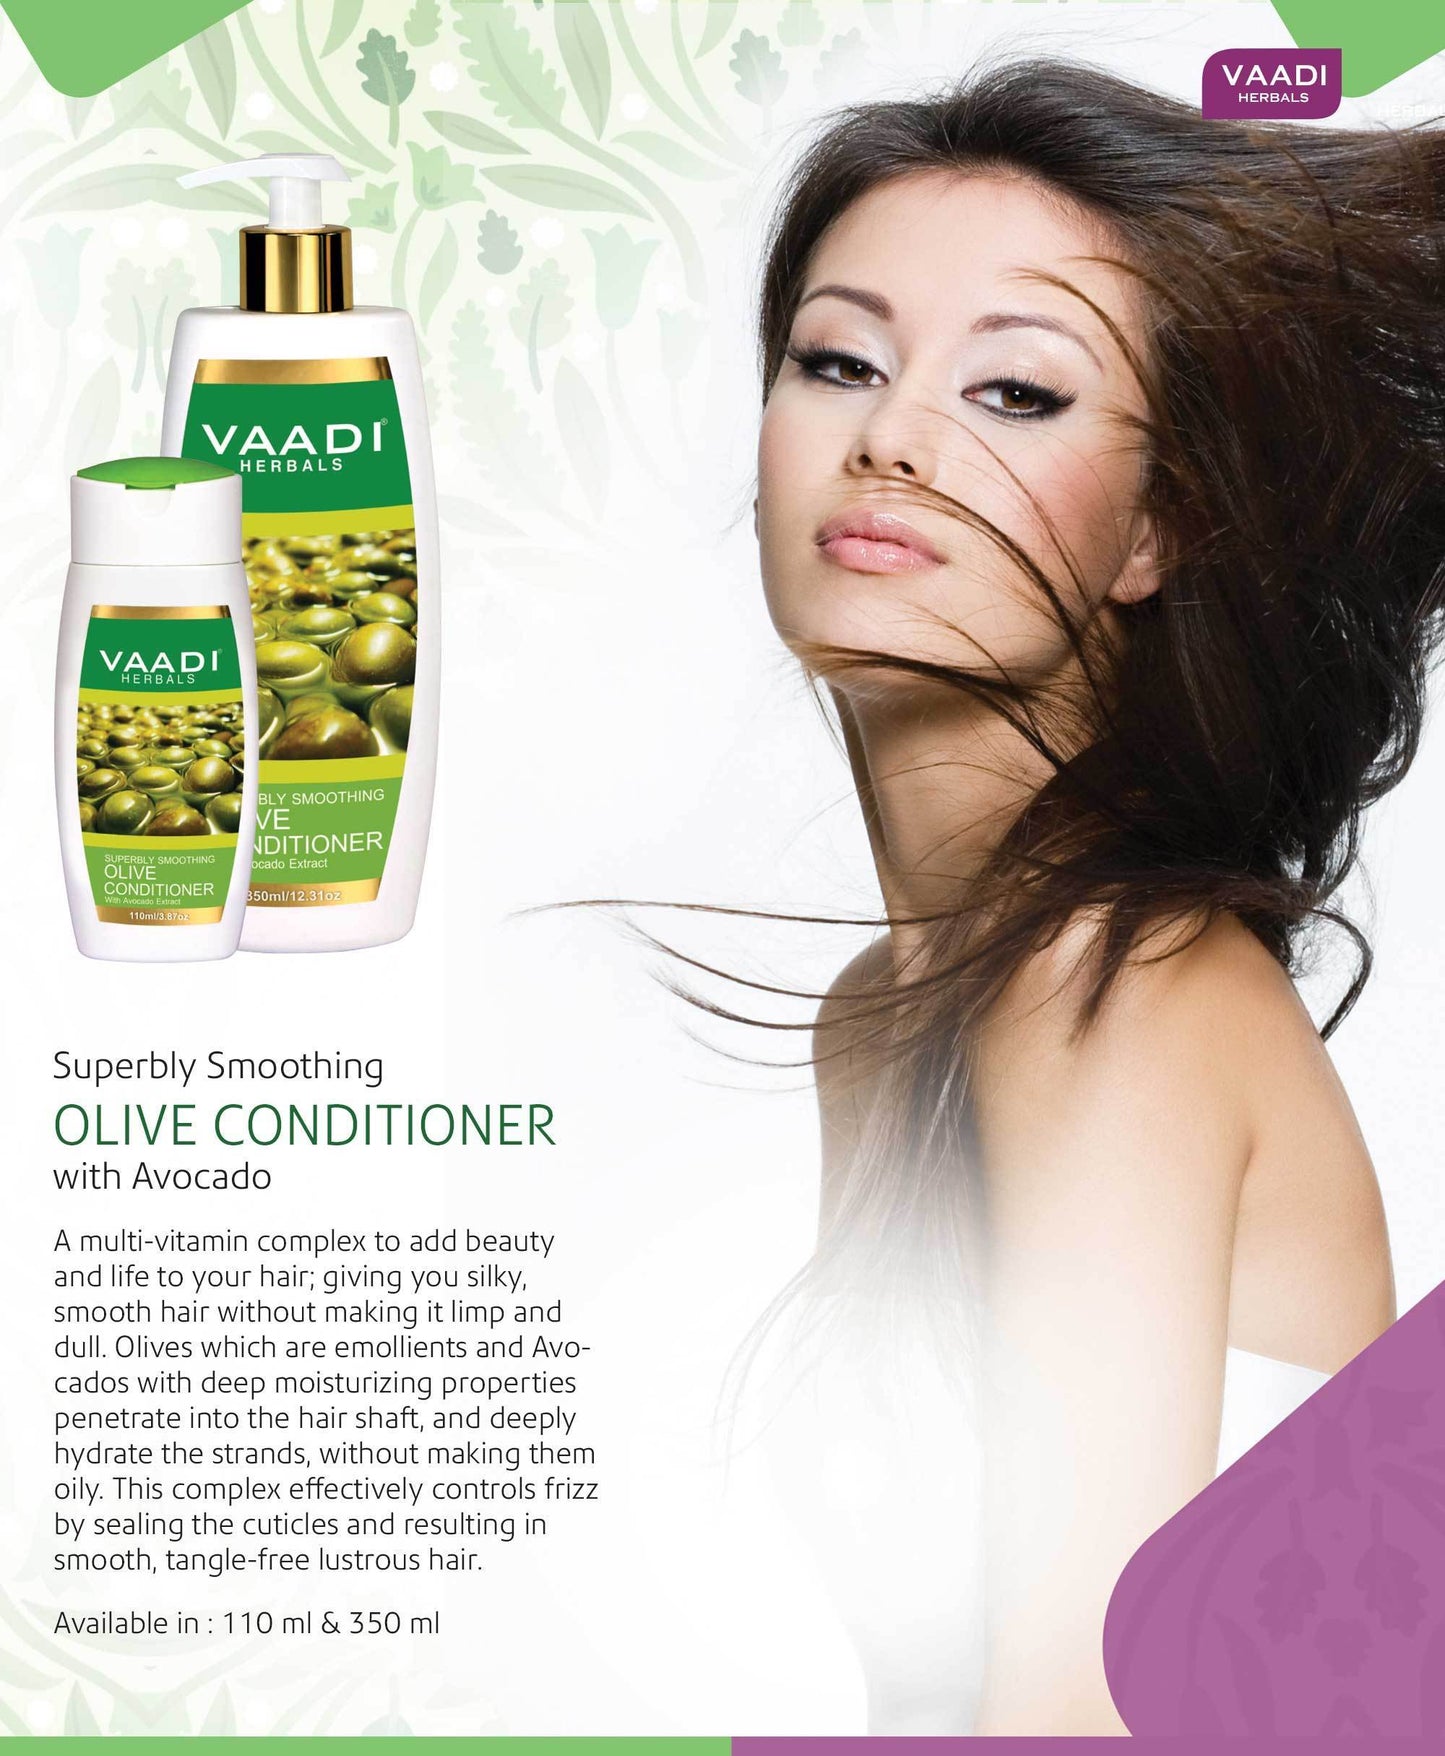 Multi Vitamin Organic Rich Olive Conditioner with Avocado Extract - Makes Hair Lustrous - Adds Bounce to Hair (3 x 110 ml/ 4 fl oz)